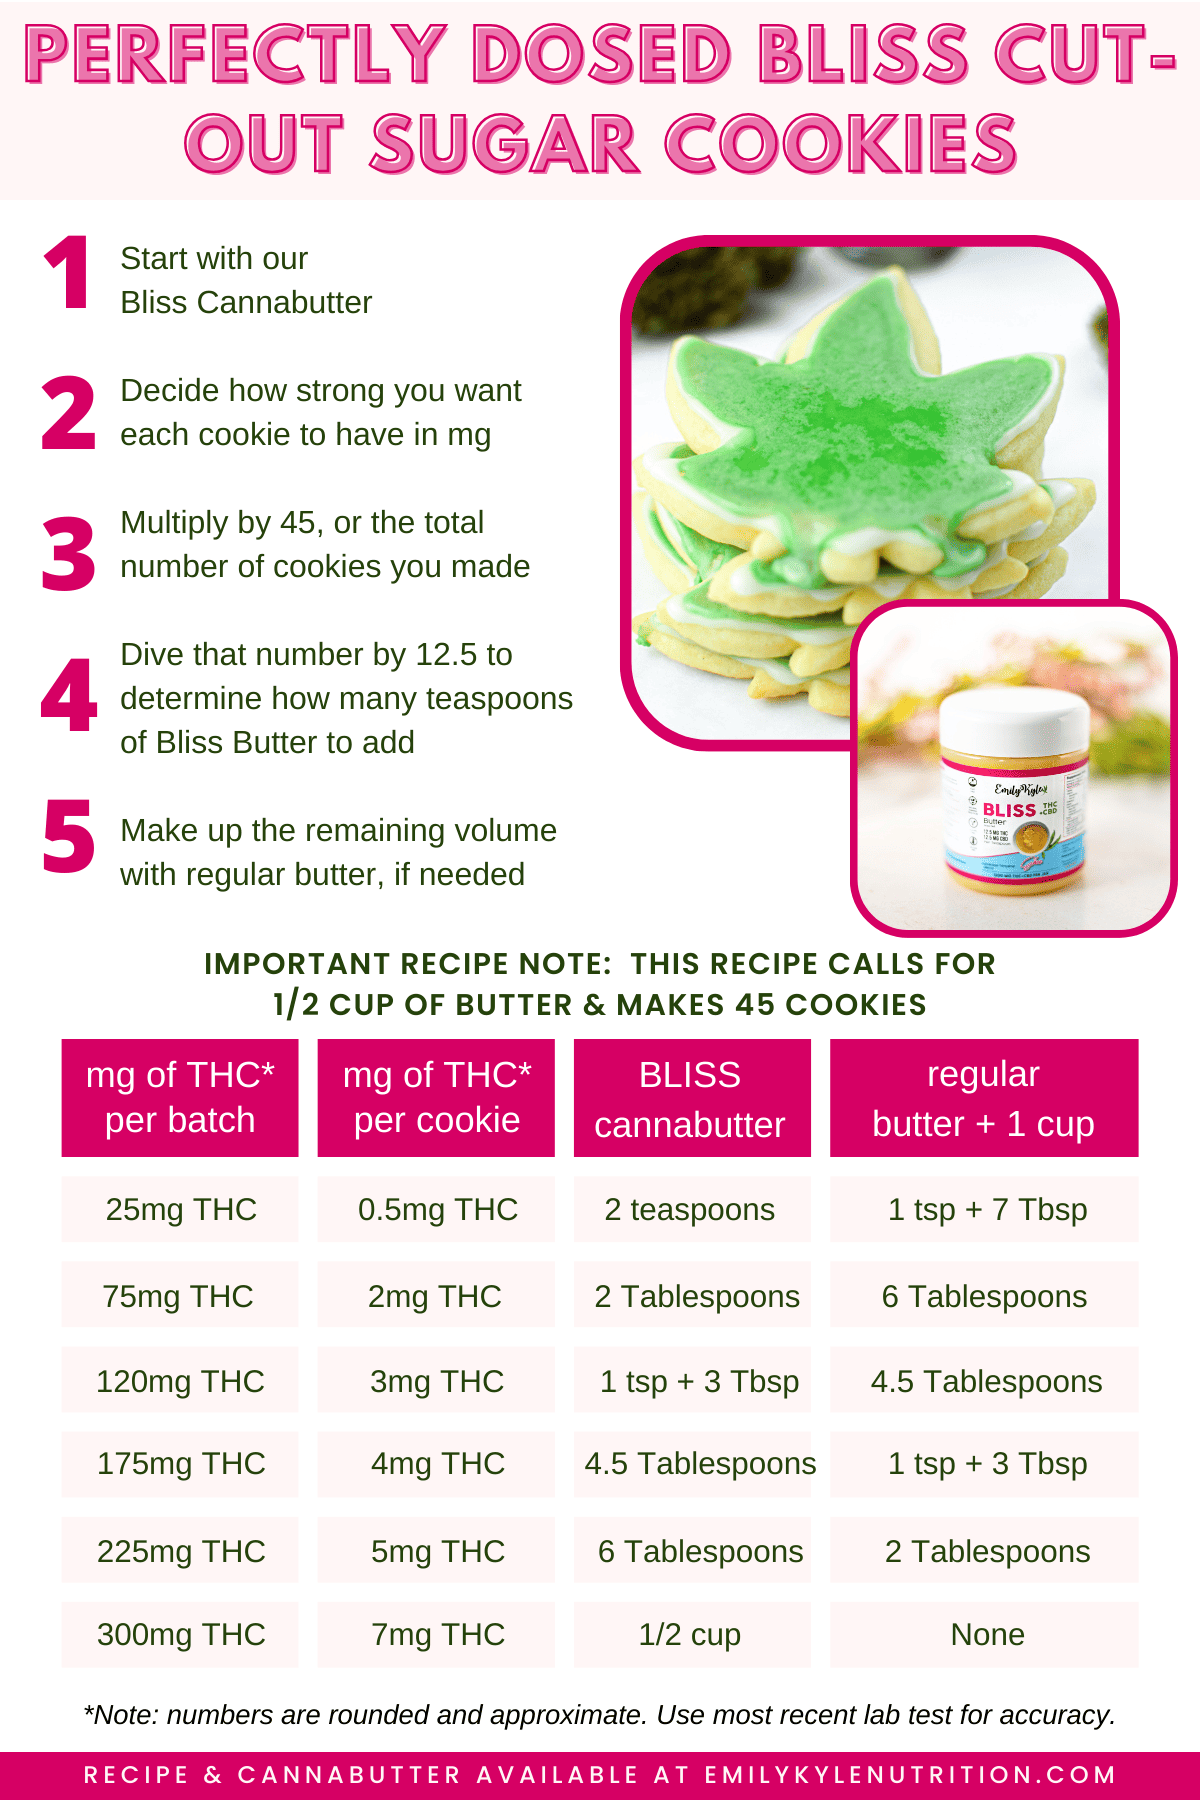 A picture of a dosage chart that shows how many mG of THC are in these cut out cookies.